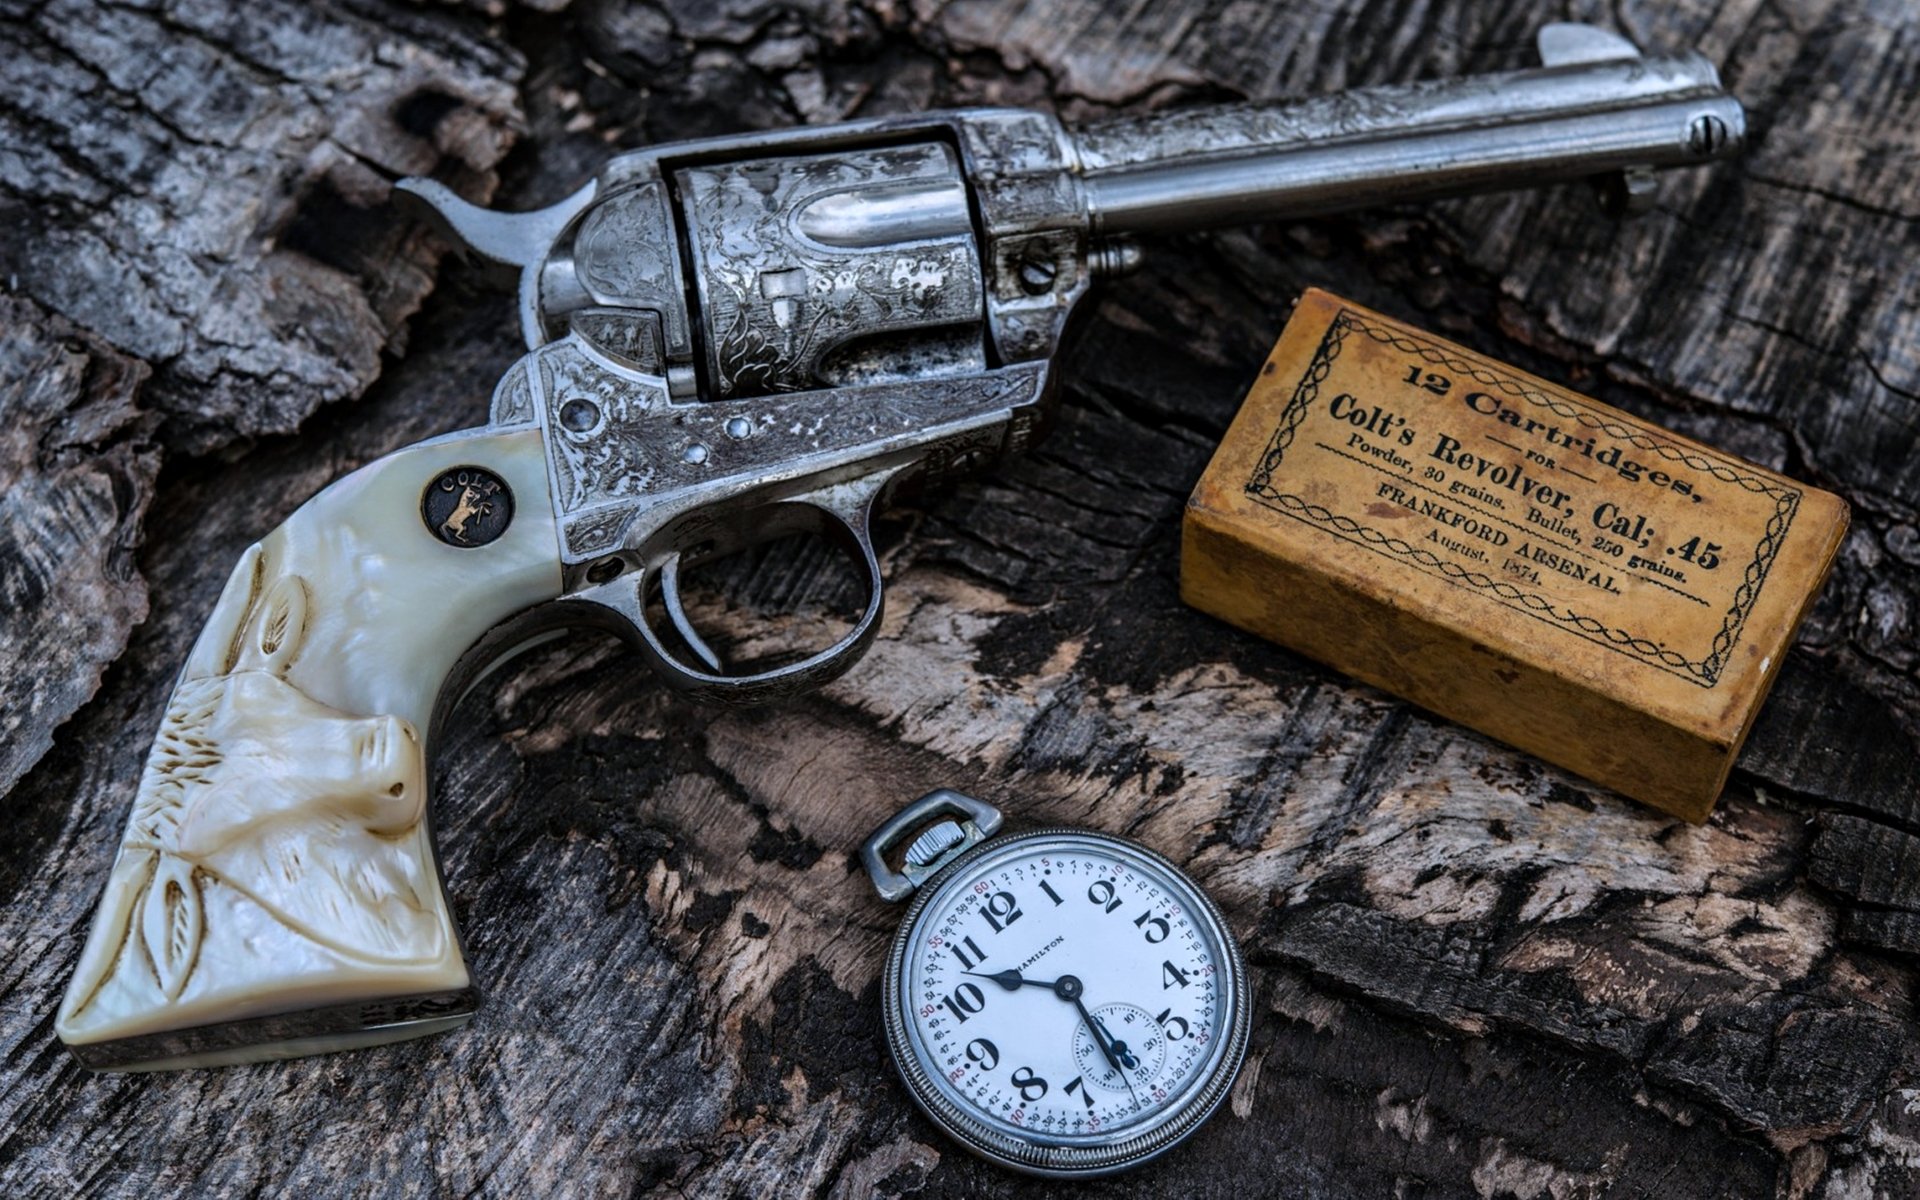 Two old metal colt revolver Stock Photo by ©witoldkr1 7355286